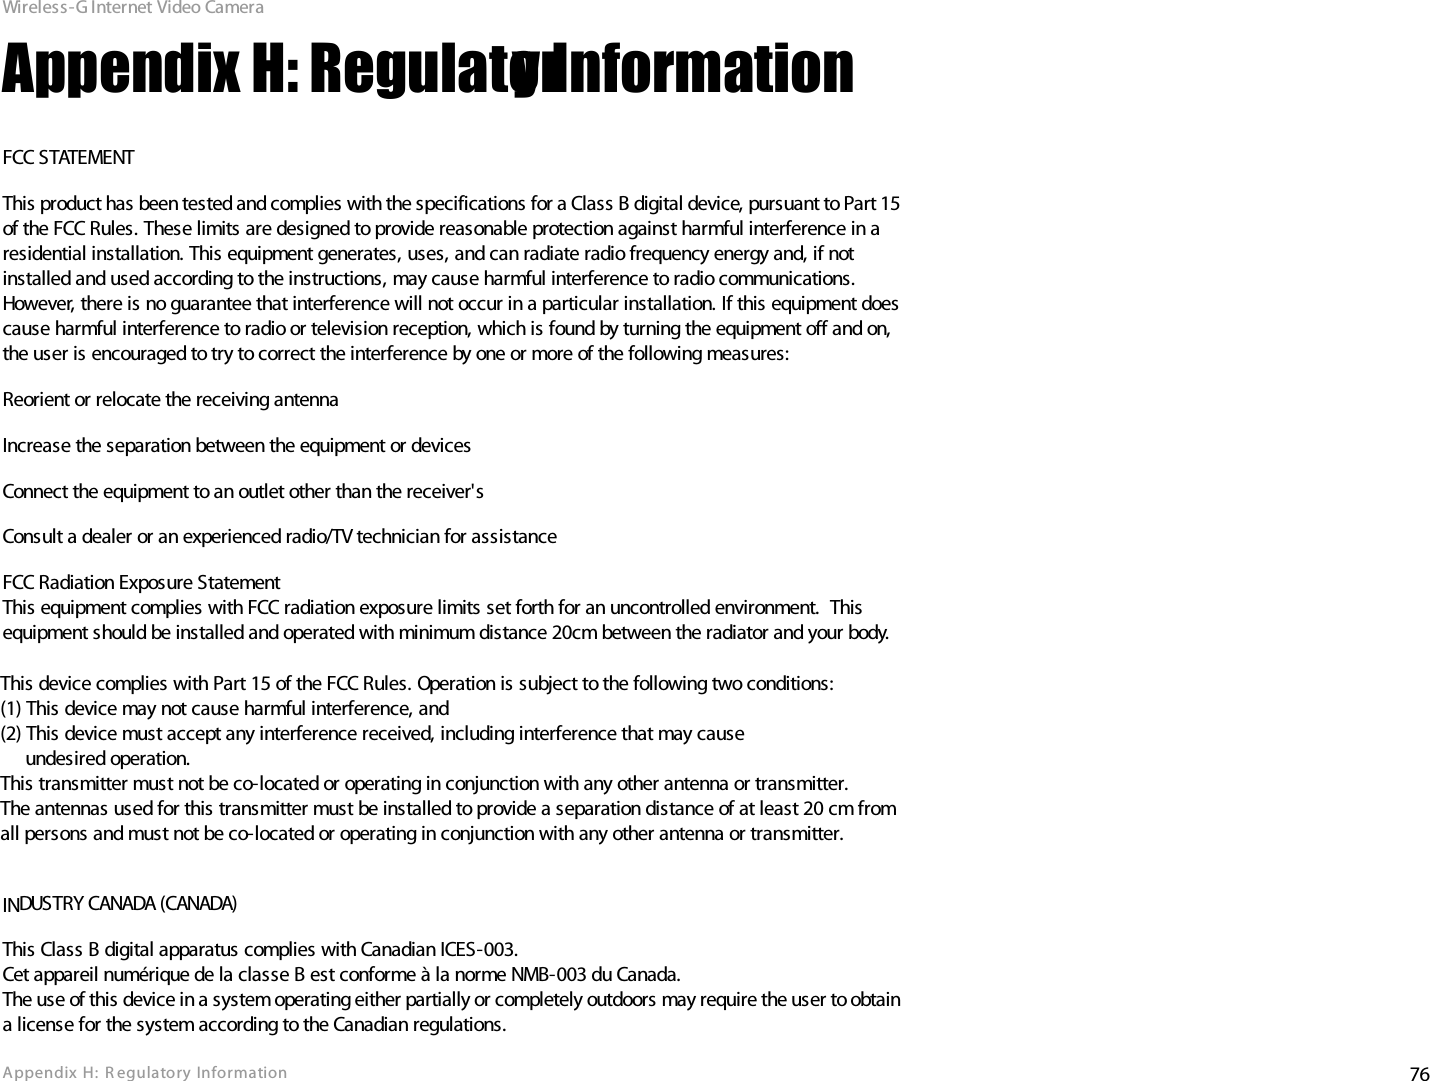 76Appendix  H: R egulatory InformationWireless-G Internet Video CameraAppendix H: Regulatory InformationFCC STATEMENTThis product has been tested and complies with the specifications for a Class B digital device, pursuant to Part 15 of the FCC Rules. These limits are designed to provide reasonable protection against harmful interference in a residential installation. This equipment generates, uses, and can radiate radio frequency energy and, if not installed and used according to the instructions, may cause harmful interference to radio communications. However, there is no guarantee that interference will not occur in a particular installation. If this equipment does cause harmful interference to radio or television reception, which is found by turning the equipment off and on, the user is encouraged to try to correct the interference by one or more of the following measures:Reorient or relocate the receiving antennaIncrease the separation between the equipment or devicesConnect the equipment to an outlet other than the receiver&apos;sConsult a dealer or an experienced radio/TV technician for assistanceFCC Radiation Exposure StatementThis equipment complies with FCC radiation exposure limits set forth for an uncontrolled environment.  This equipment should be installed and operated with minimum distance 20cm between the radiator and your body.INDUSTRY CANADA (CANADA)This Class B digital apparatus complies with Canadian ICES-003.Cet appareil numérique de la classe B est conforme à la norme NMB-003 du Canada.The use of this device in a system operating either partially or completely outdoors may require the user to obtain a license for the system according to the Canadian regulations.This device complies with Part 15 of the FCC Rules. Operation is subject to the following two conditions:(1) This device may not cause harmful interference, and(2) This device must accept any interference received, including interference that may cause     undesired operation.This transmitter must not be co-located or operating in conjunction with any other antenna or transmitter.The antennas used for this transmitter must be installed to provide a separation distance of at least 20 cm from all persons and must not be co-located or operating in conjunction with any other antenna or transmitter.